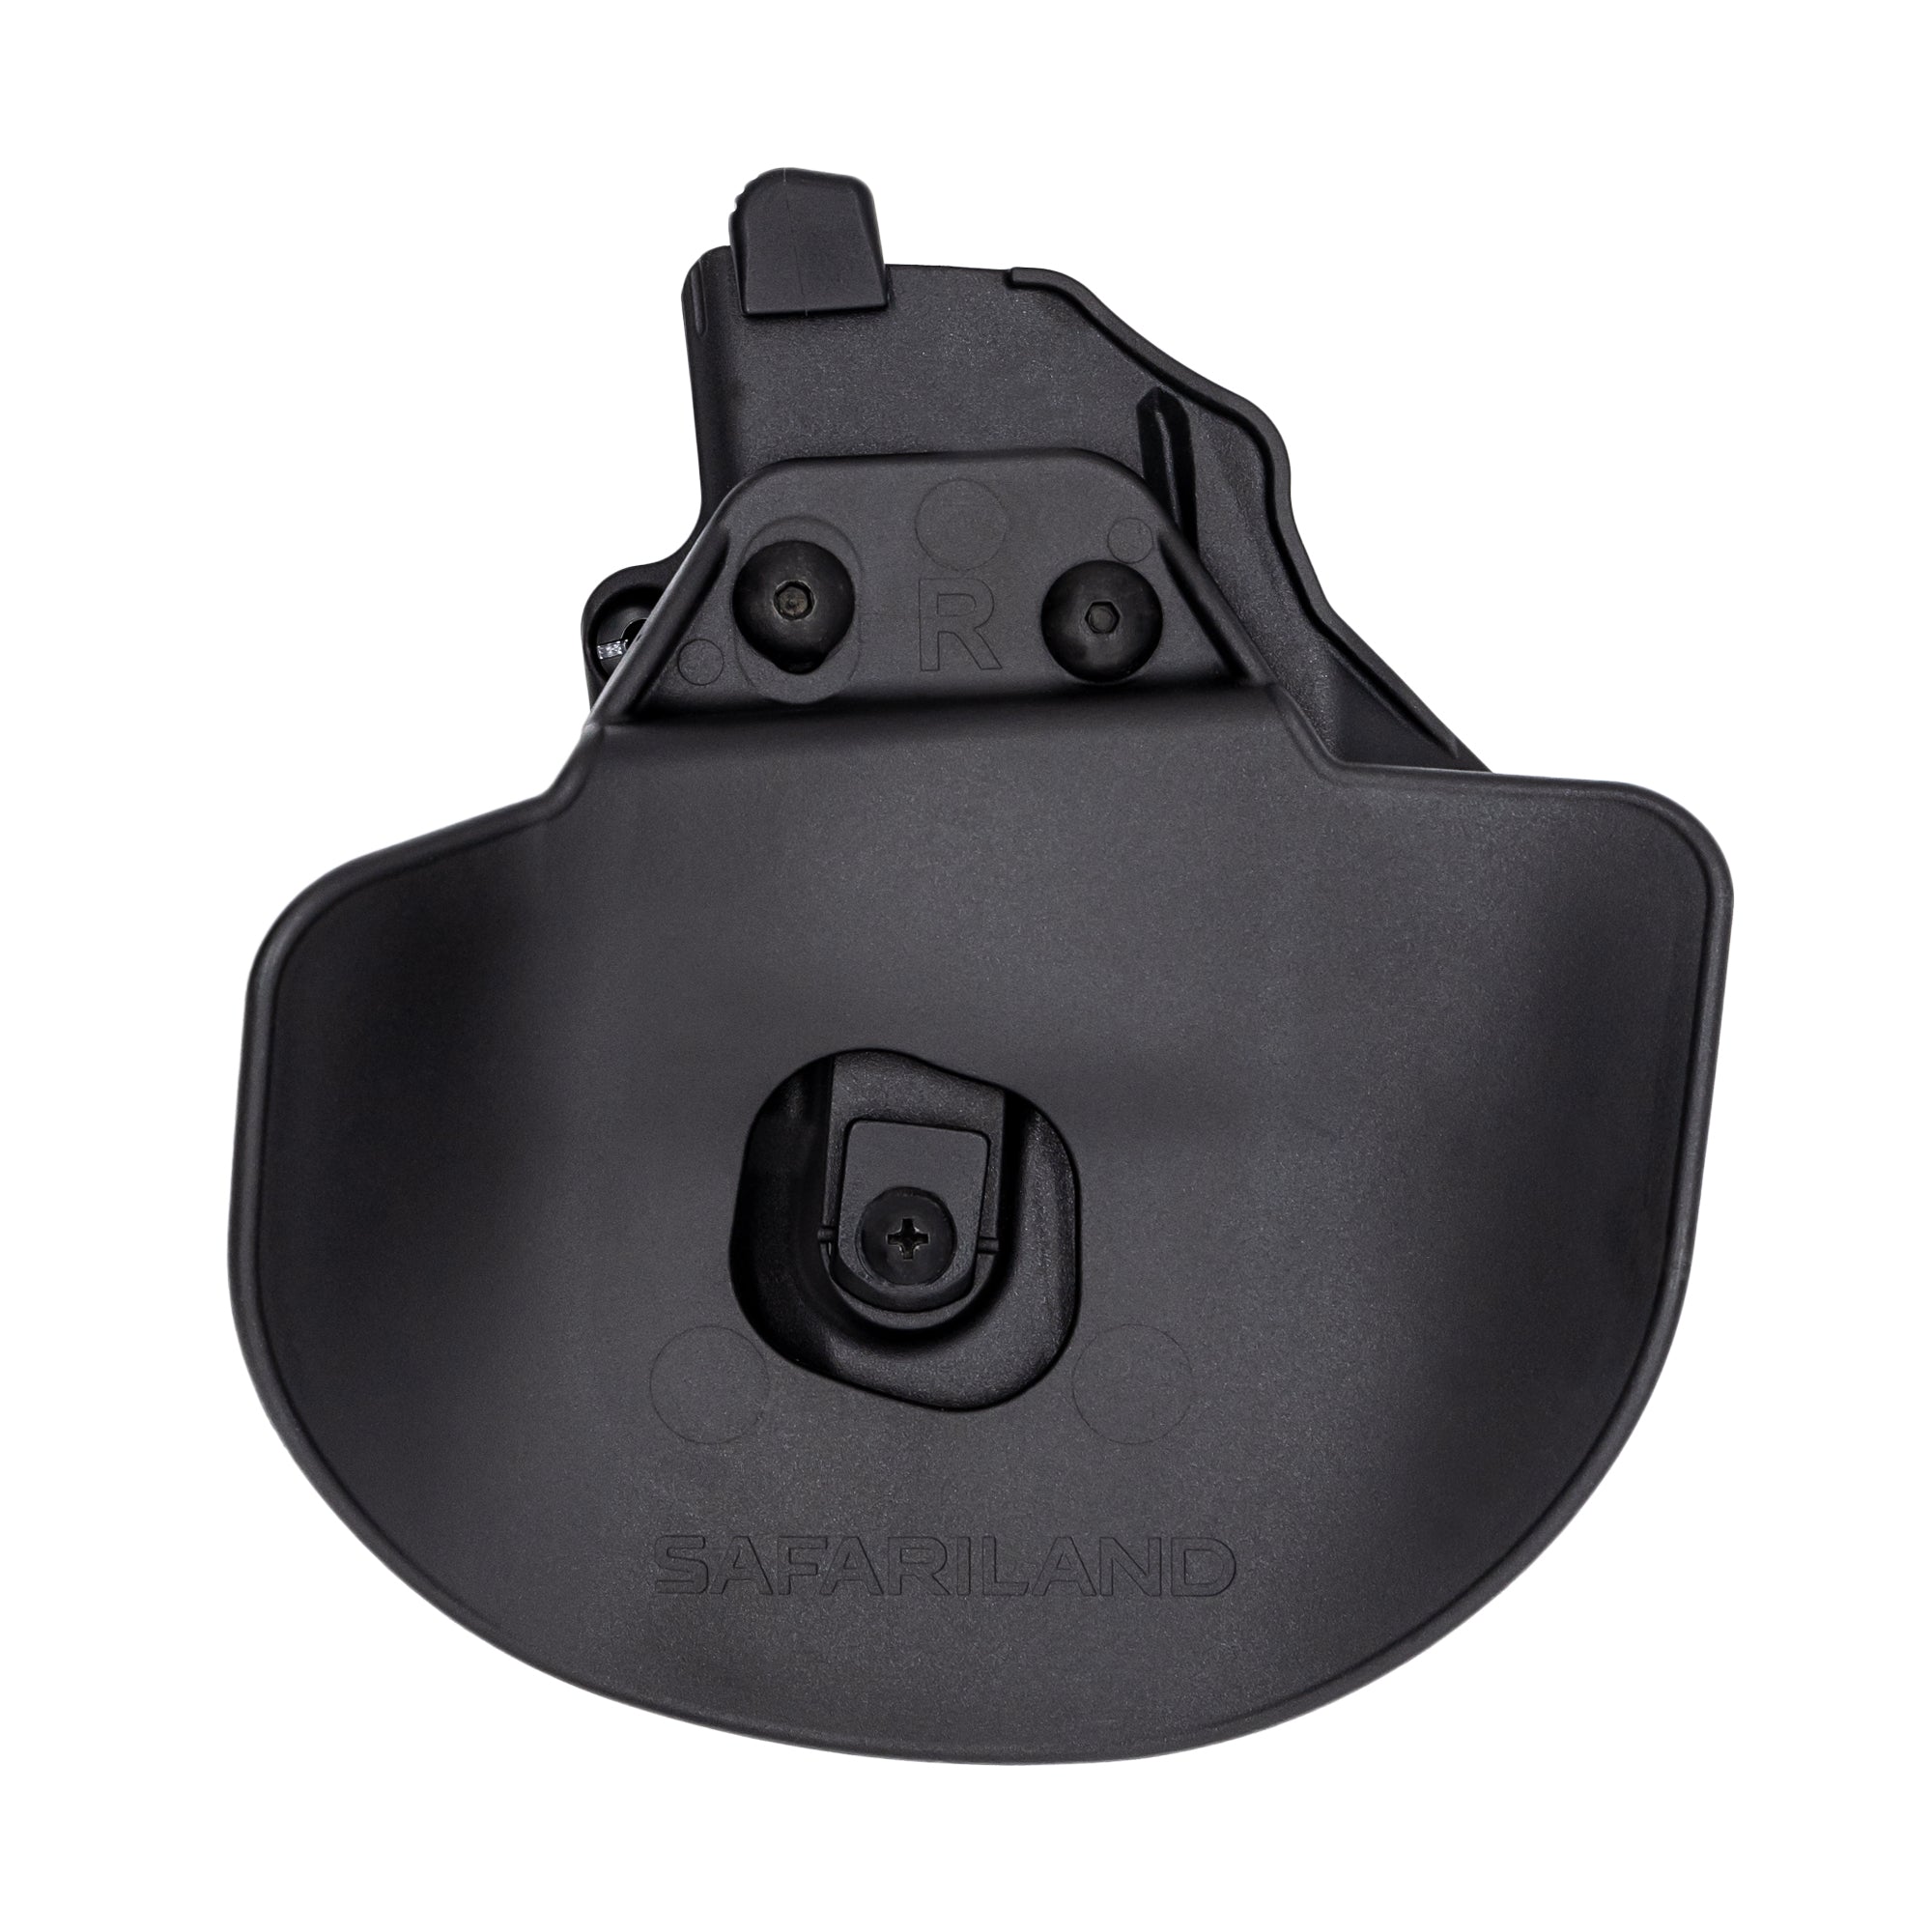 First Look at the New Safariland® RGR UBL 